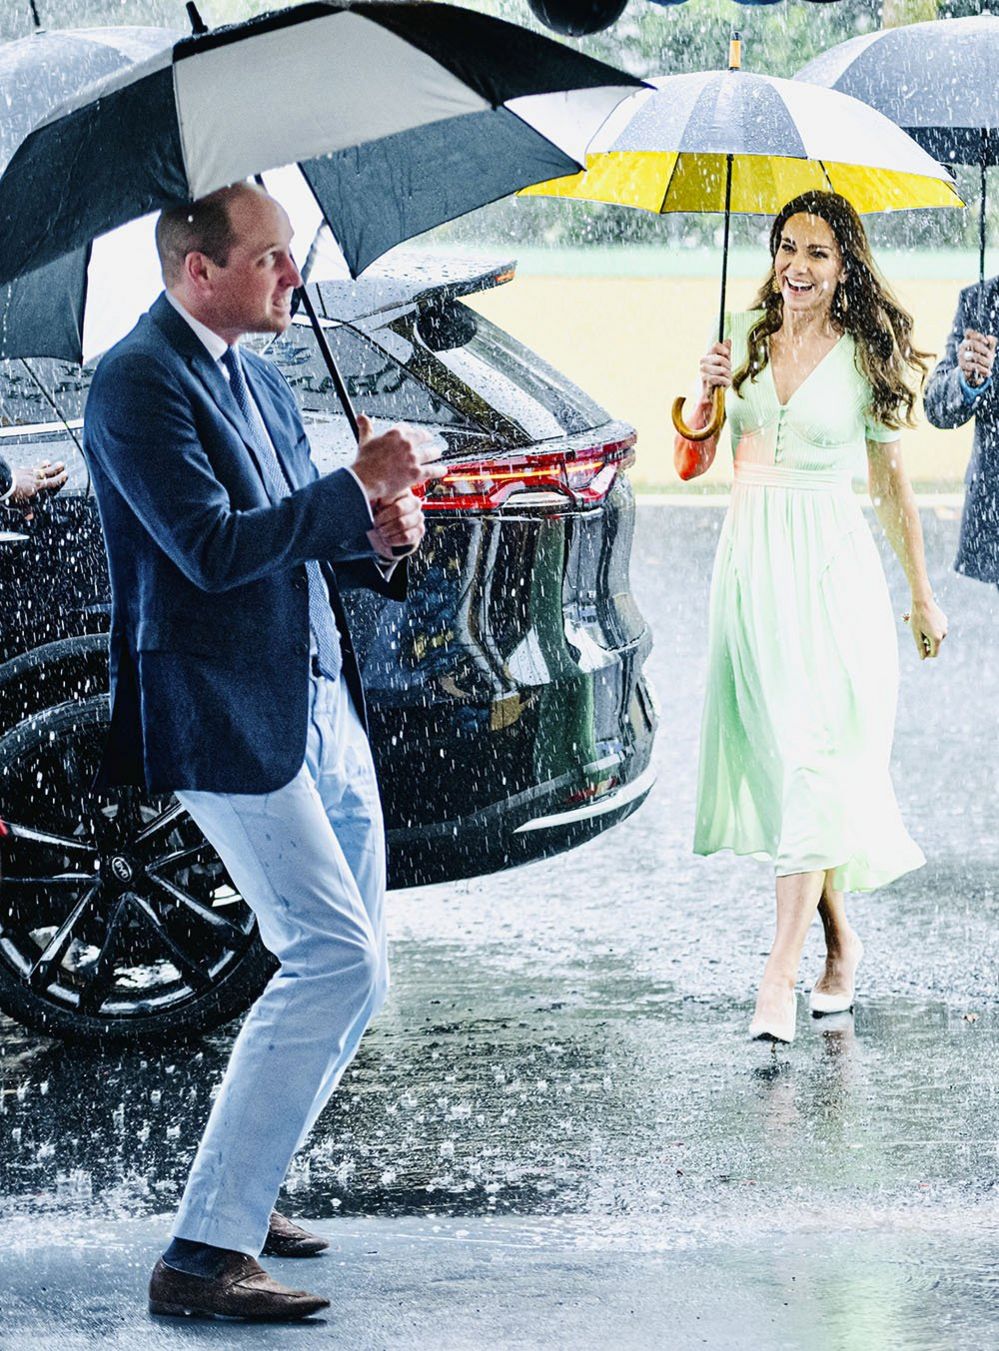 Prince and Princess of Wales in the rain